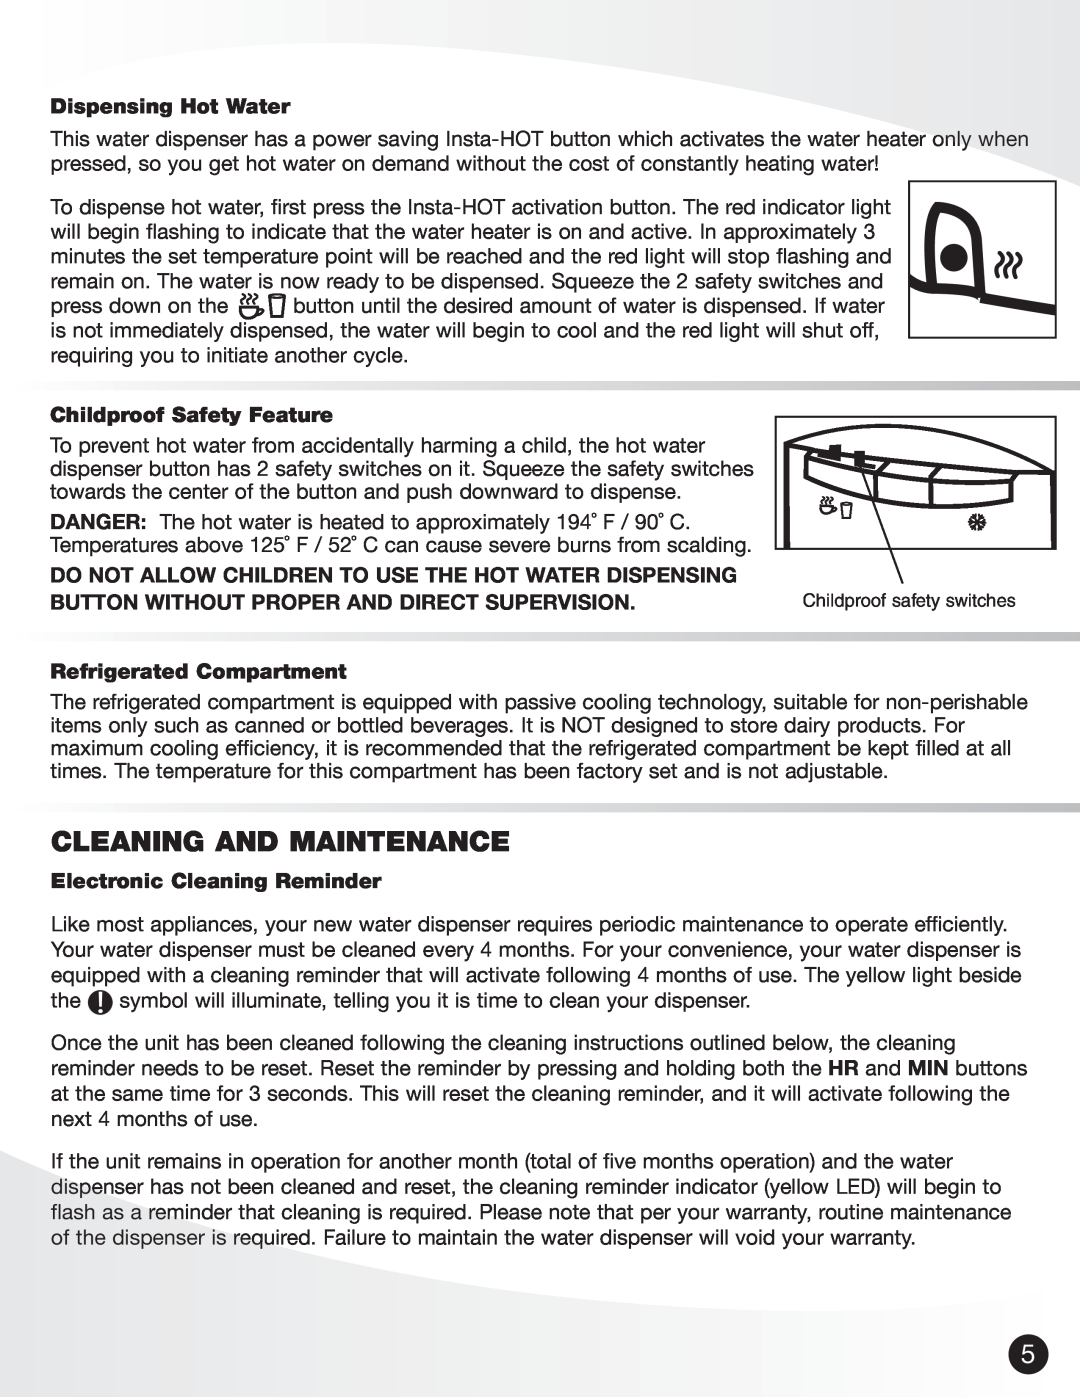 Greenway Home Products VWD8956BLS Cleaning And Maintenance, Dispensing Hot Water, Childproof Safety Feature 